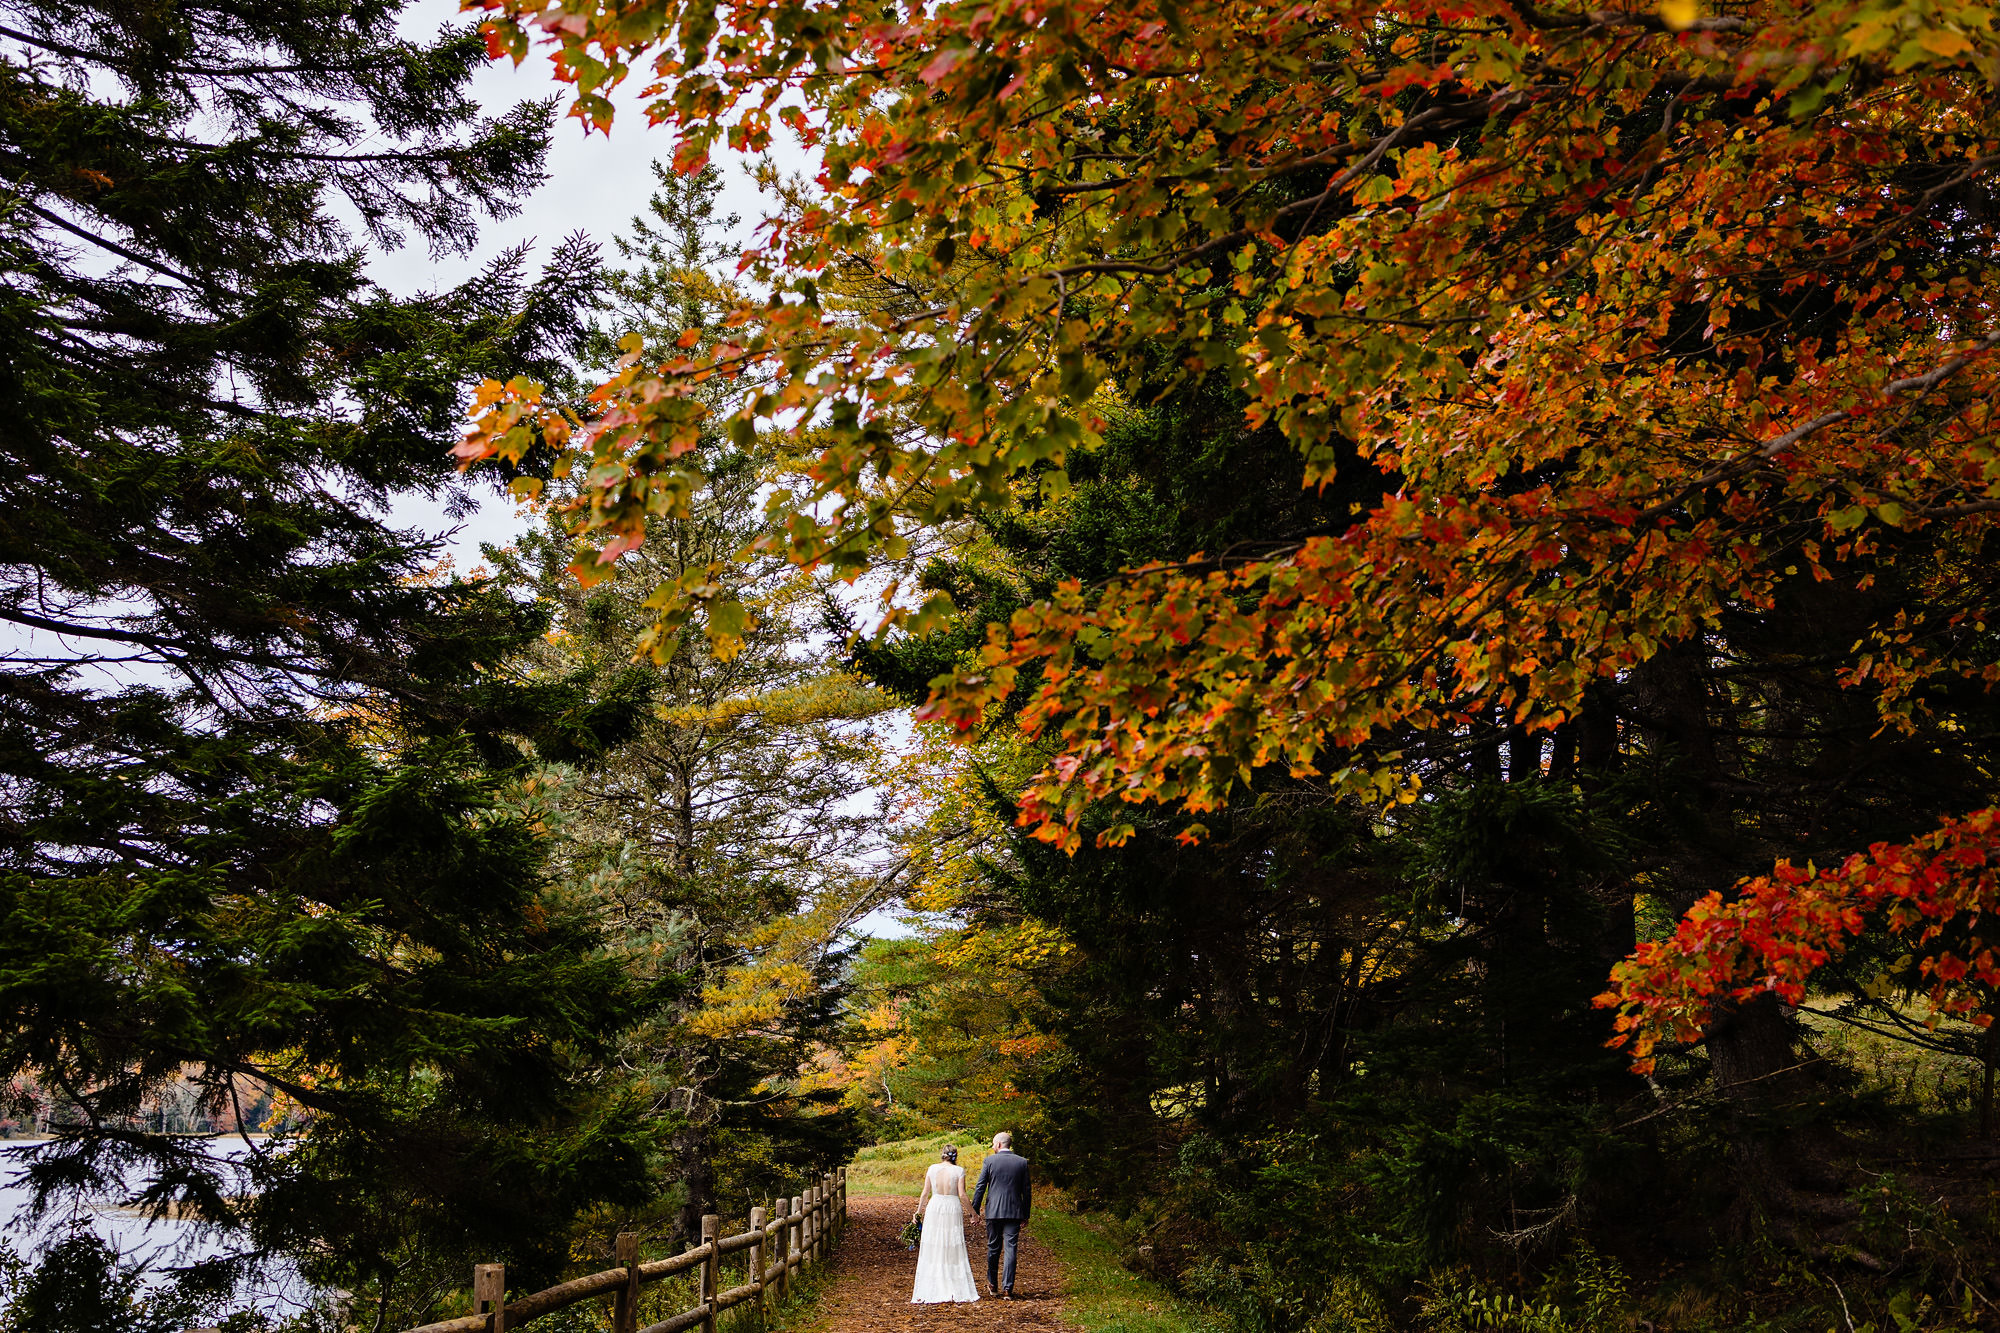 Jenna and Jordan walk around a pond in Acadia National Park during their elopement